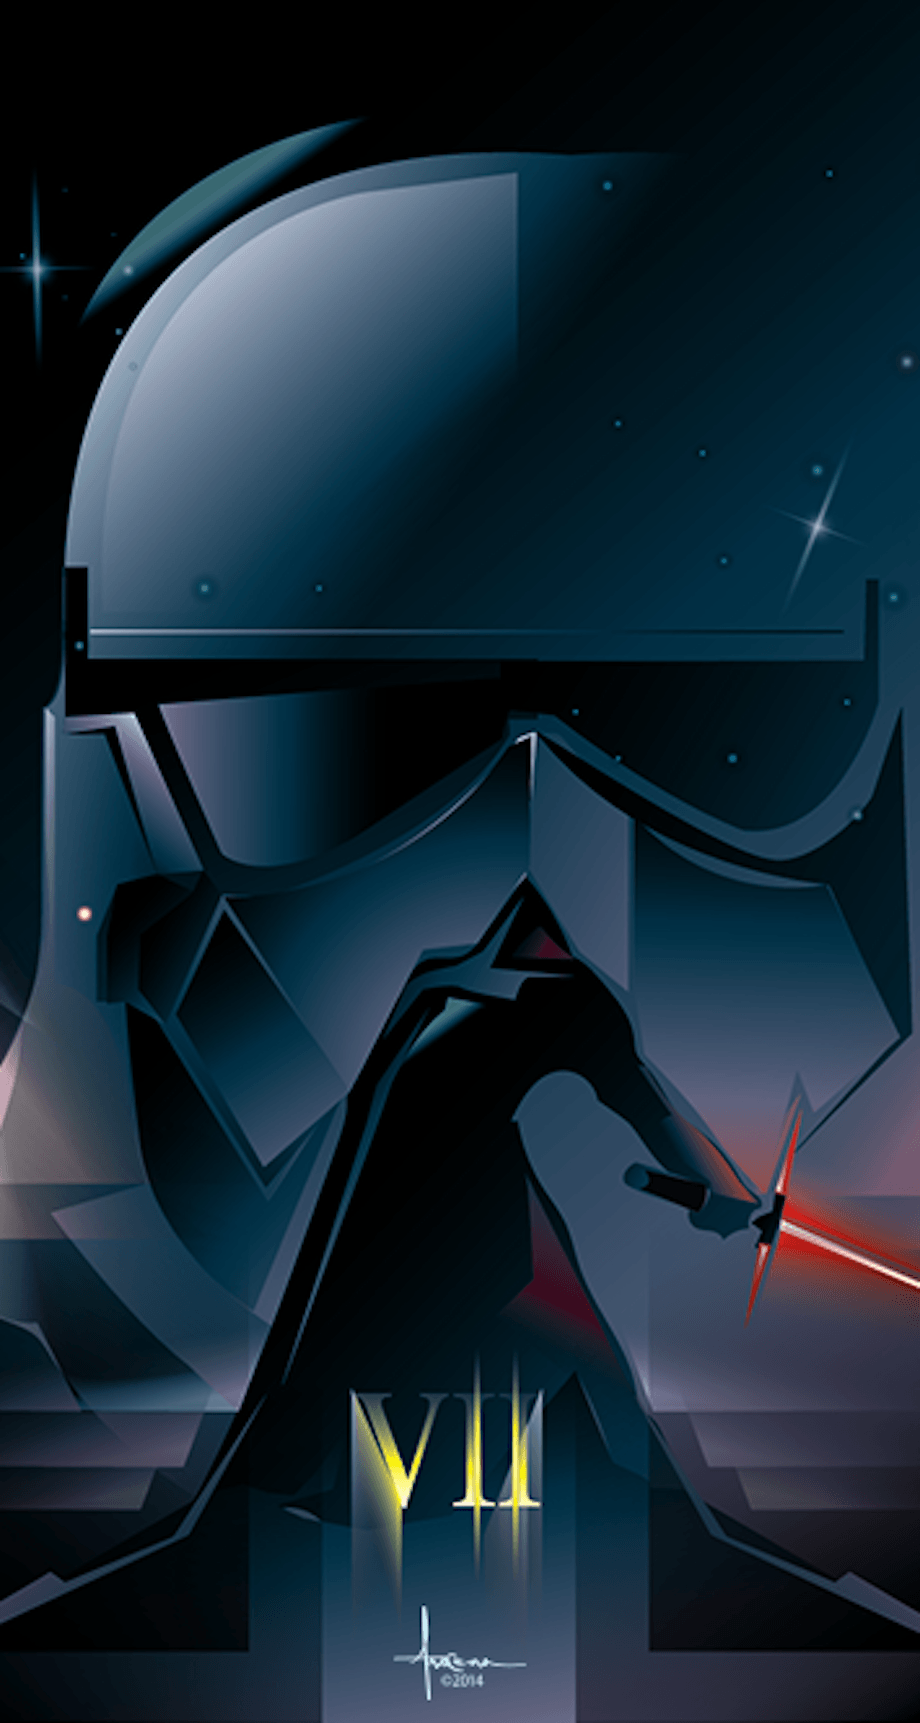 Download These Star Wars Wallpapers Now! :: FOOYOH ENTERTAINMENT